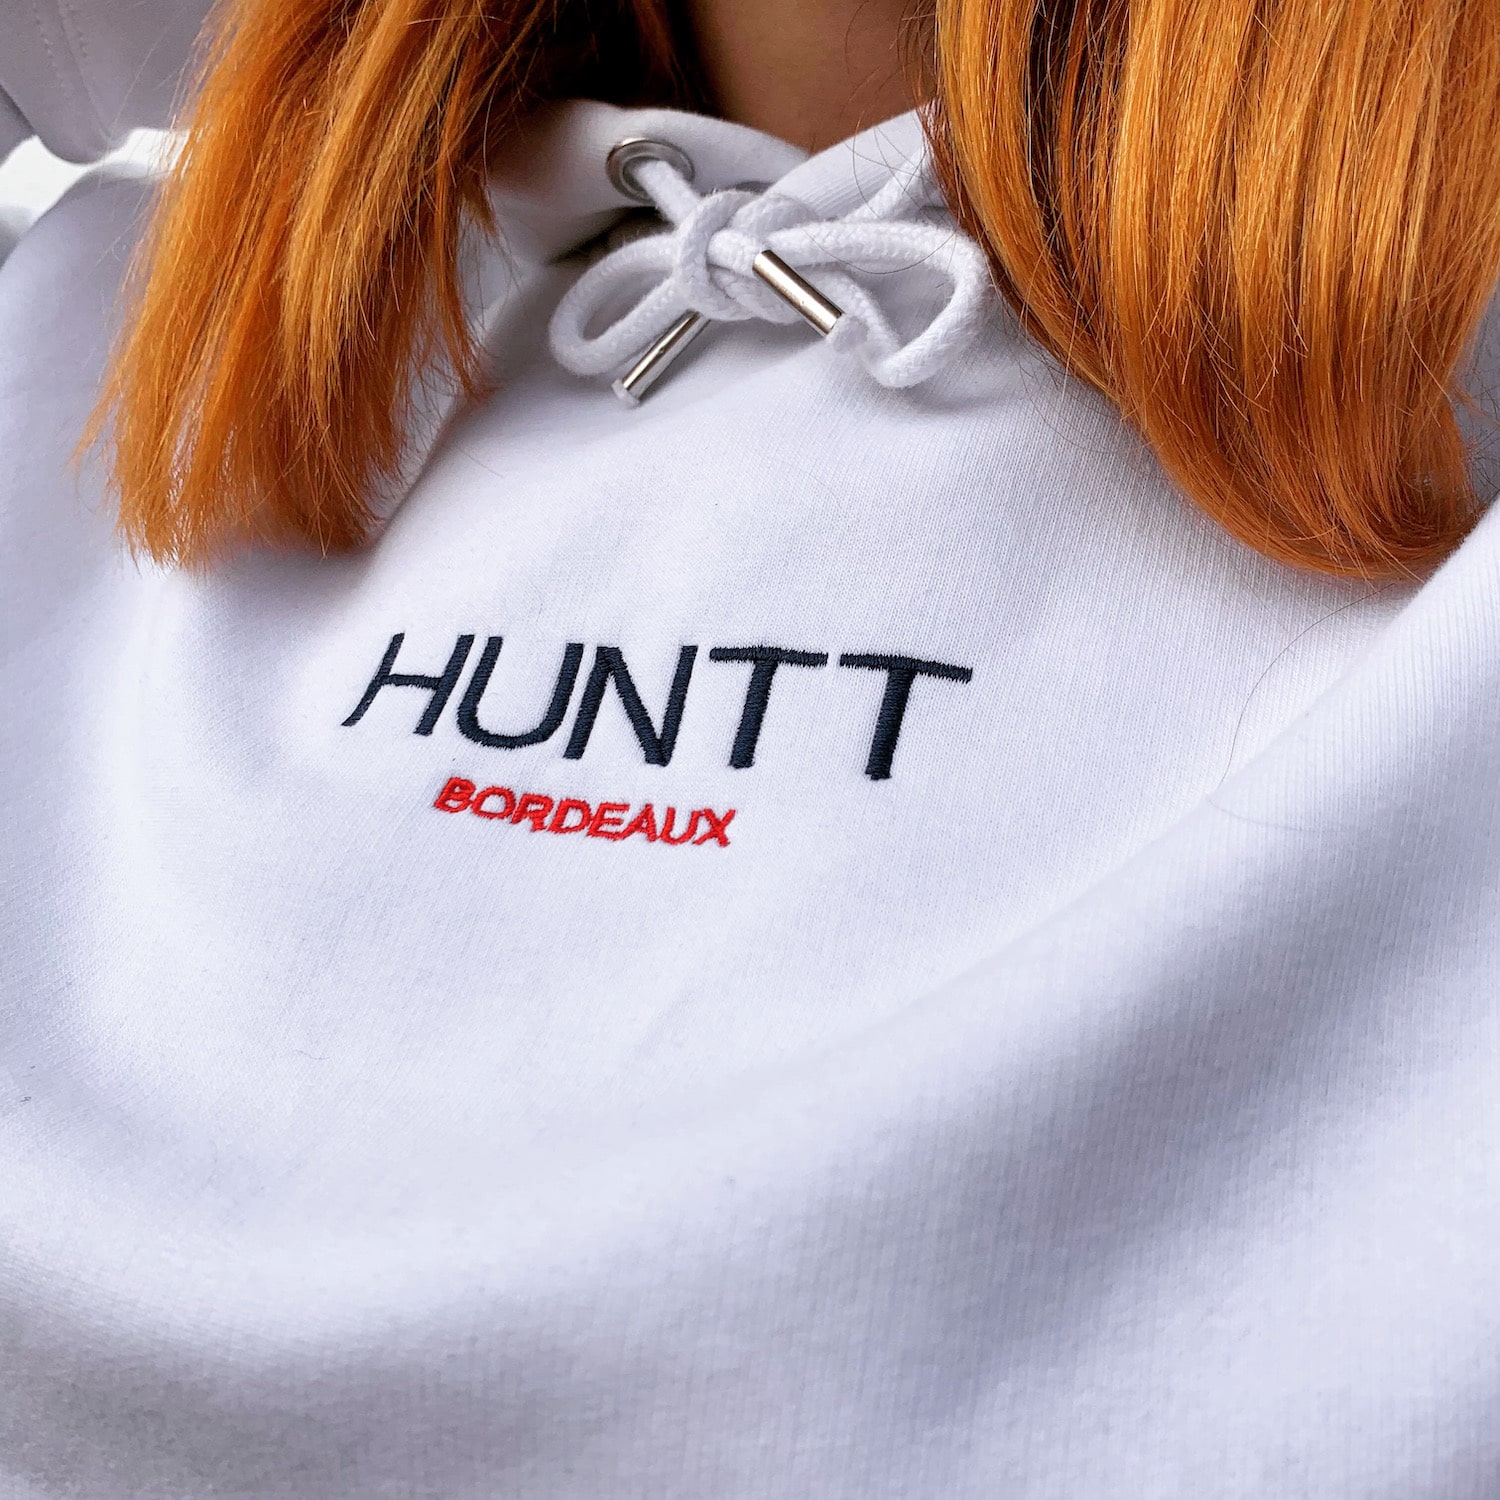 A woman wearing a white hoodie with Huntt Bordeaux embroidery